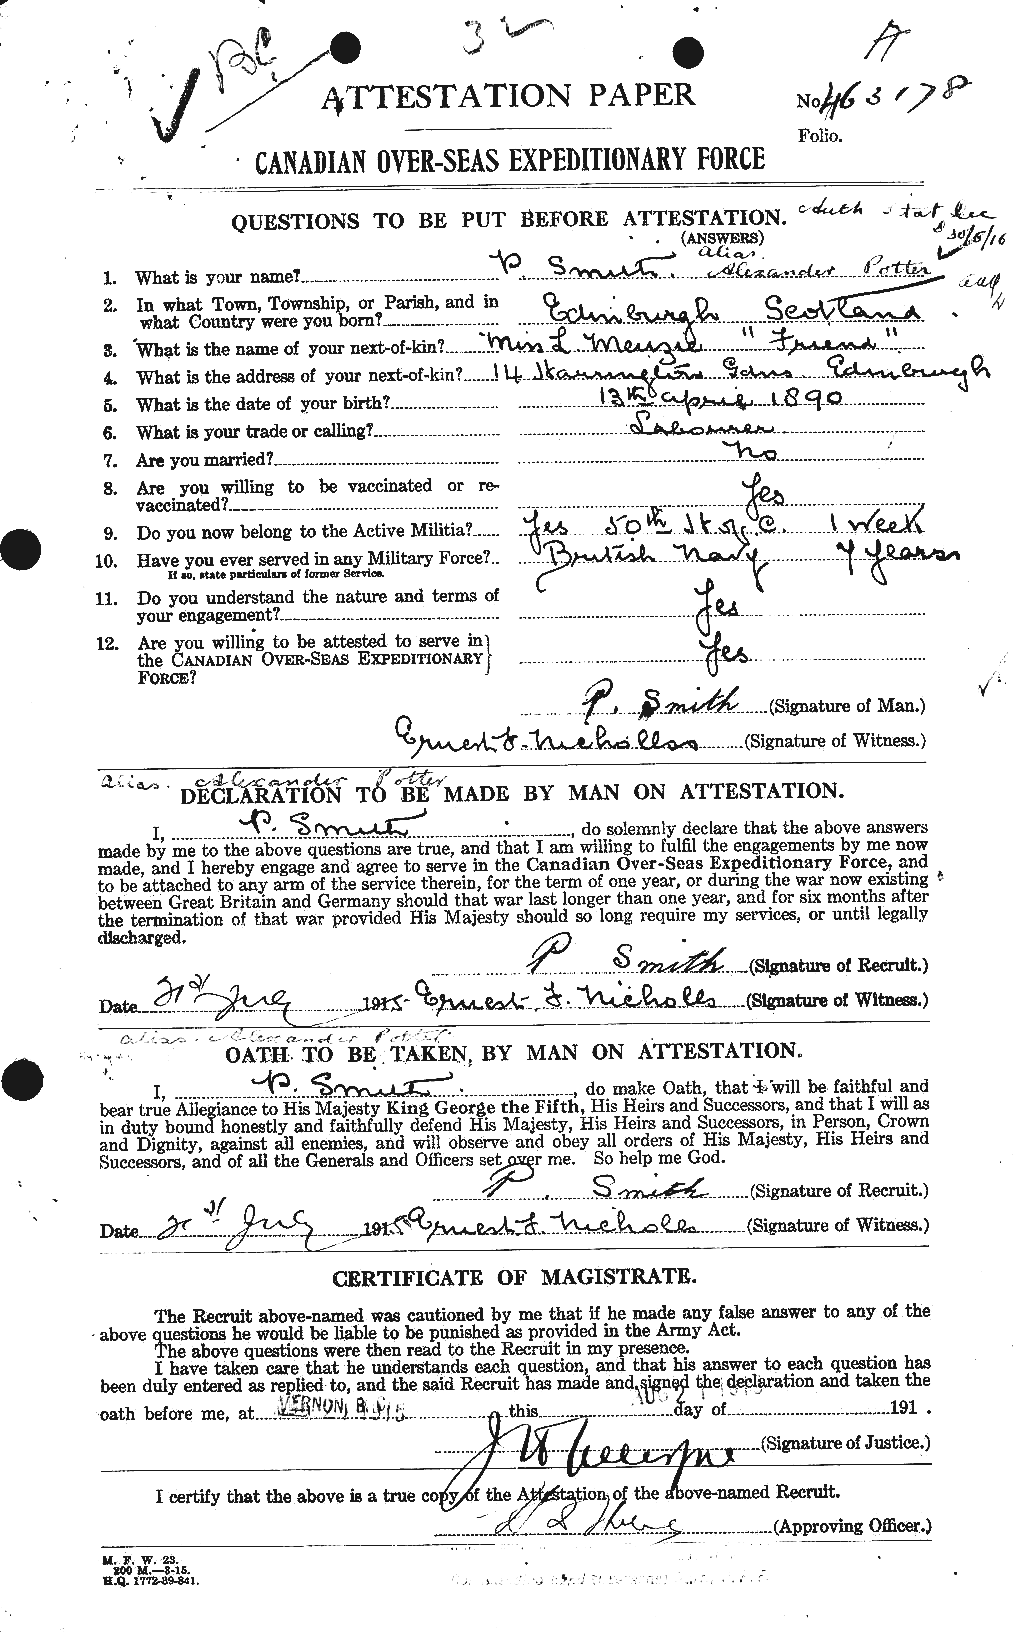 Personnel Records of the First World War - CEF 584195a